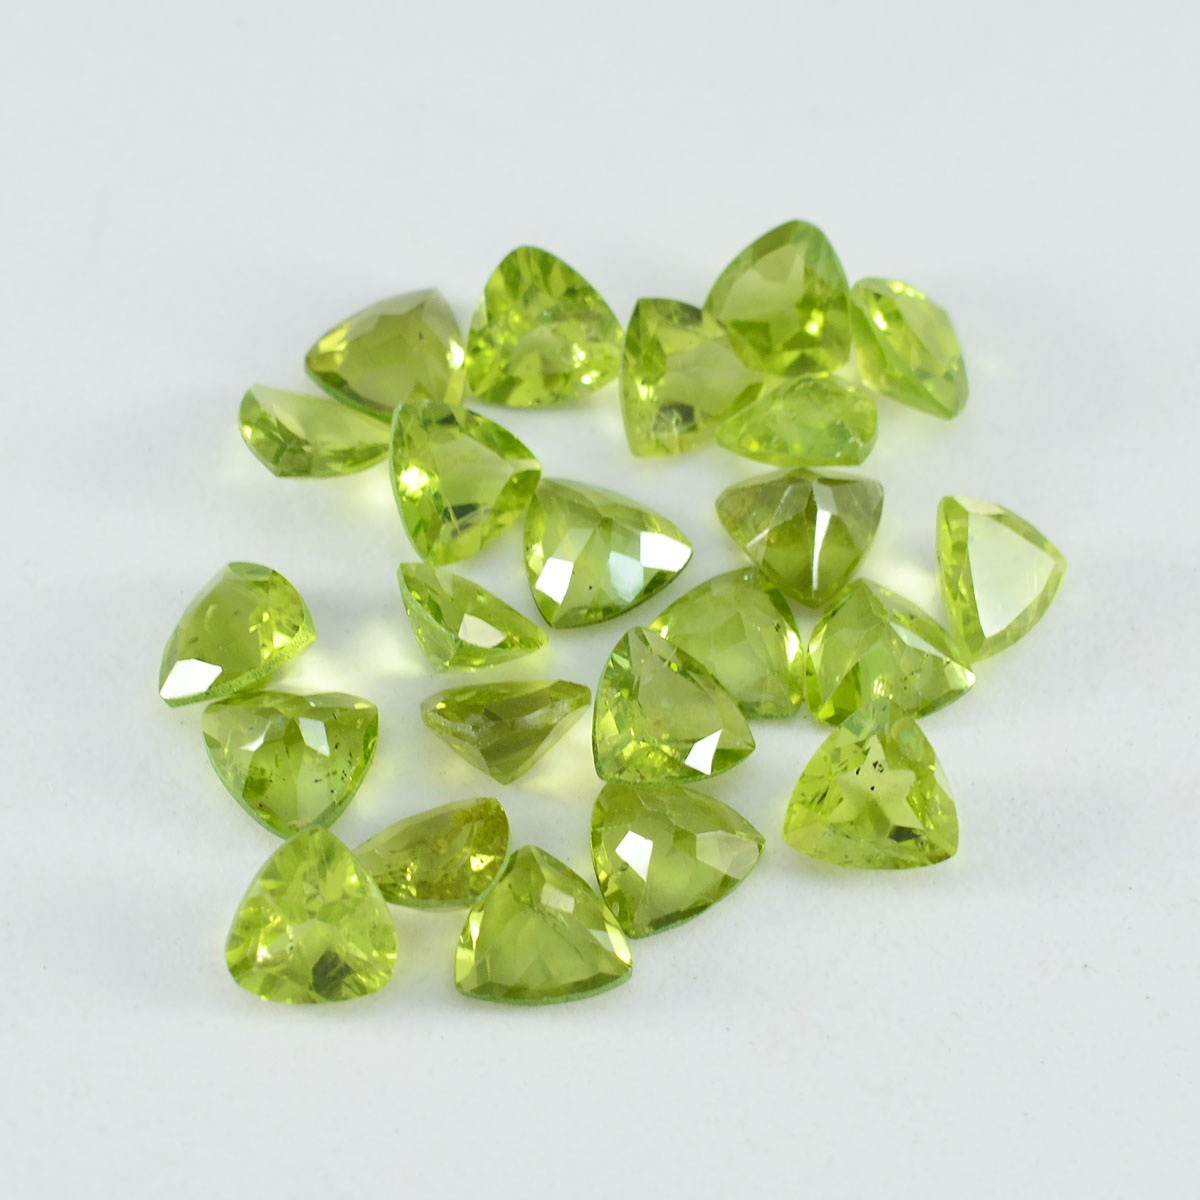 Riyogems 1PC Natural Green Peridot Faceted 7x7 mm Trillion Shape amazing Quality Loose Gems